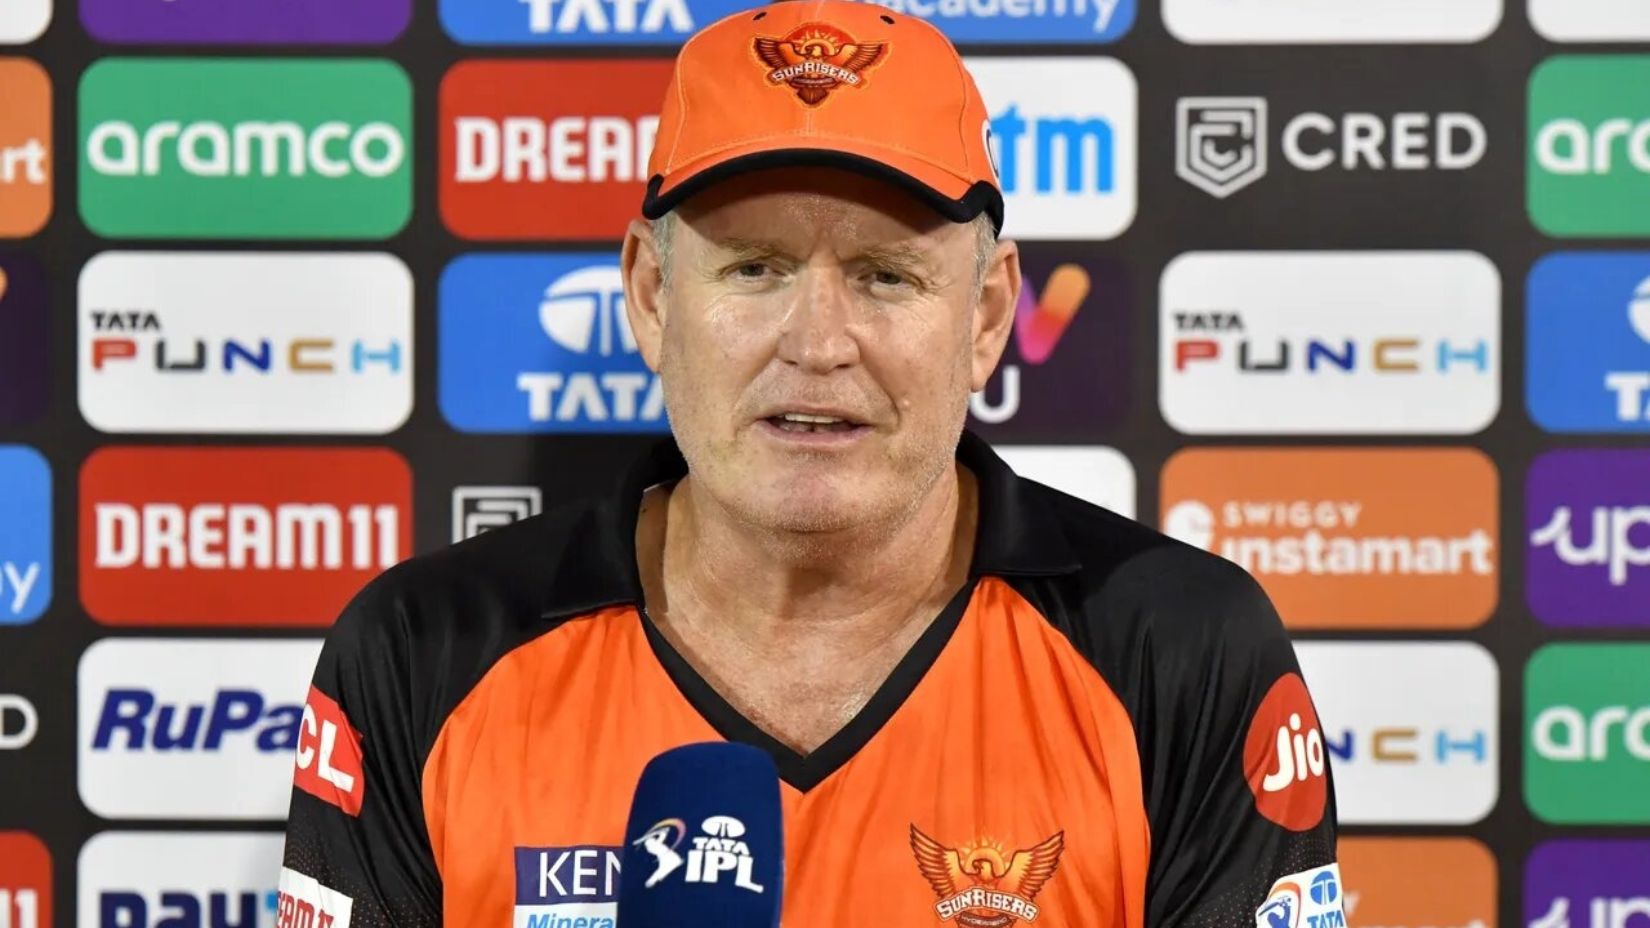 IPL 2023: Stoinis extends top hand through the ball to make sure he gets maximum contact, says Tom Moody